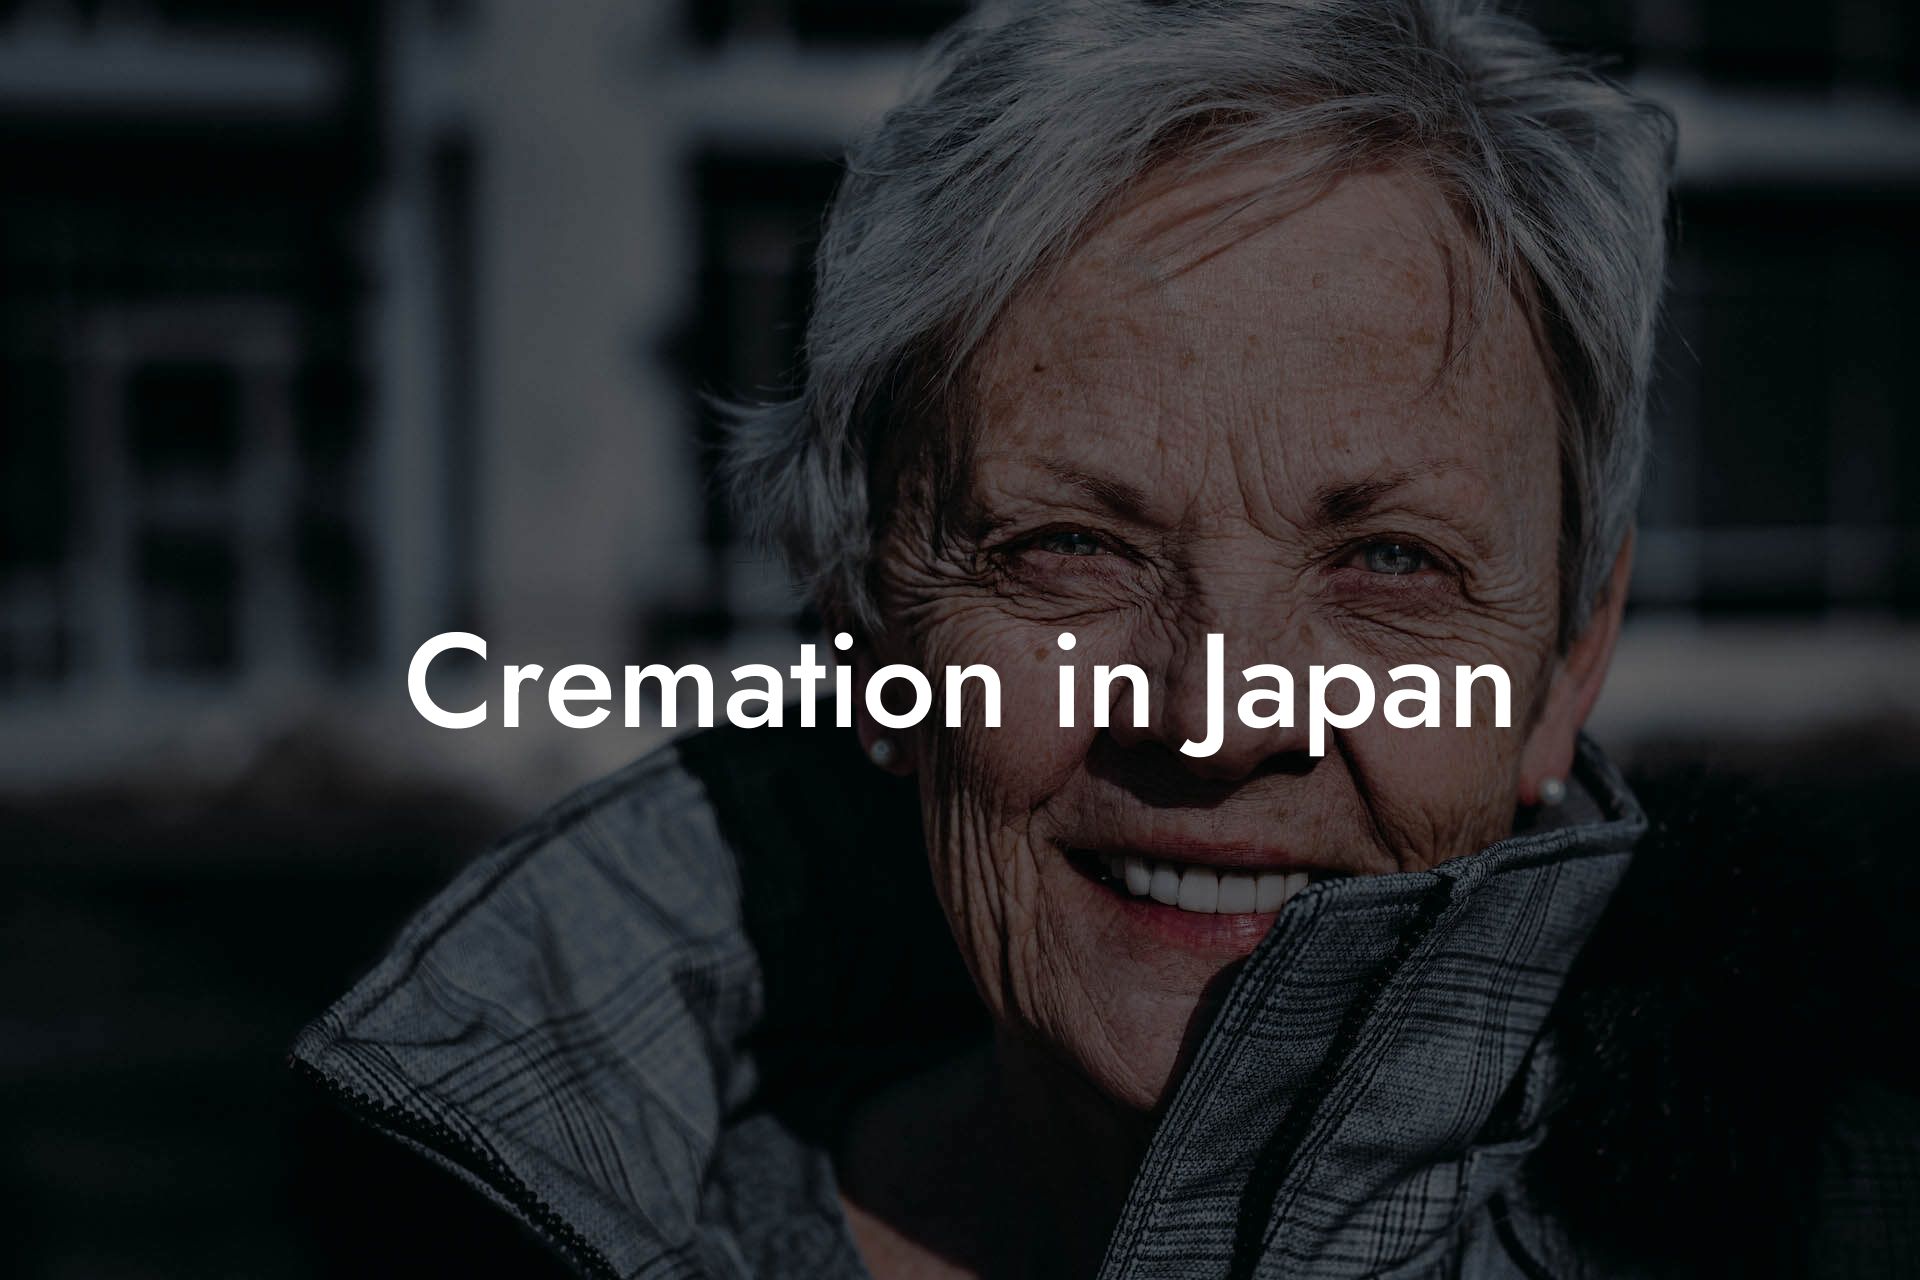 Cremation in Japan